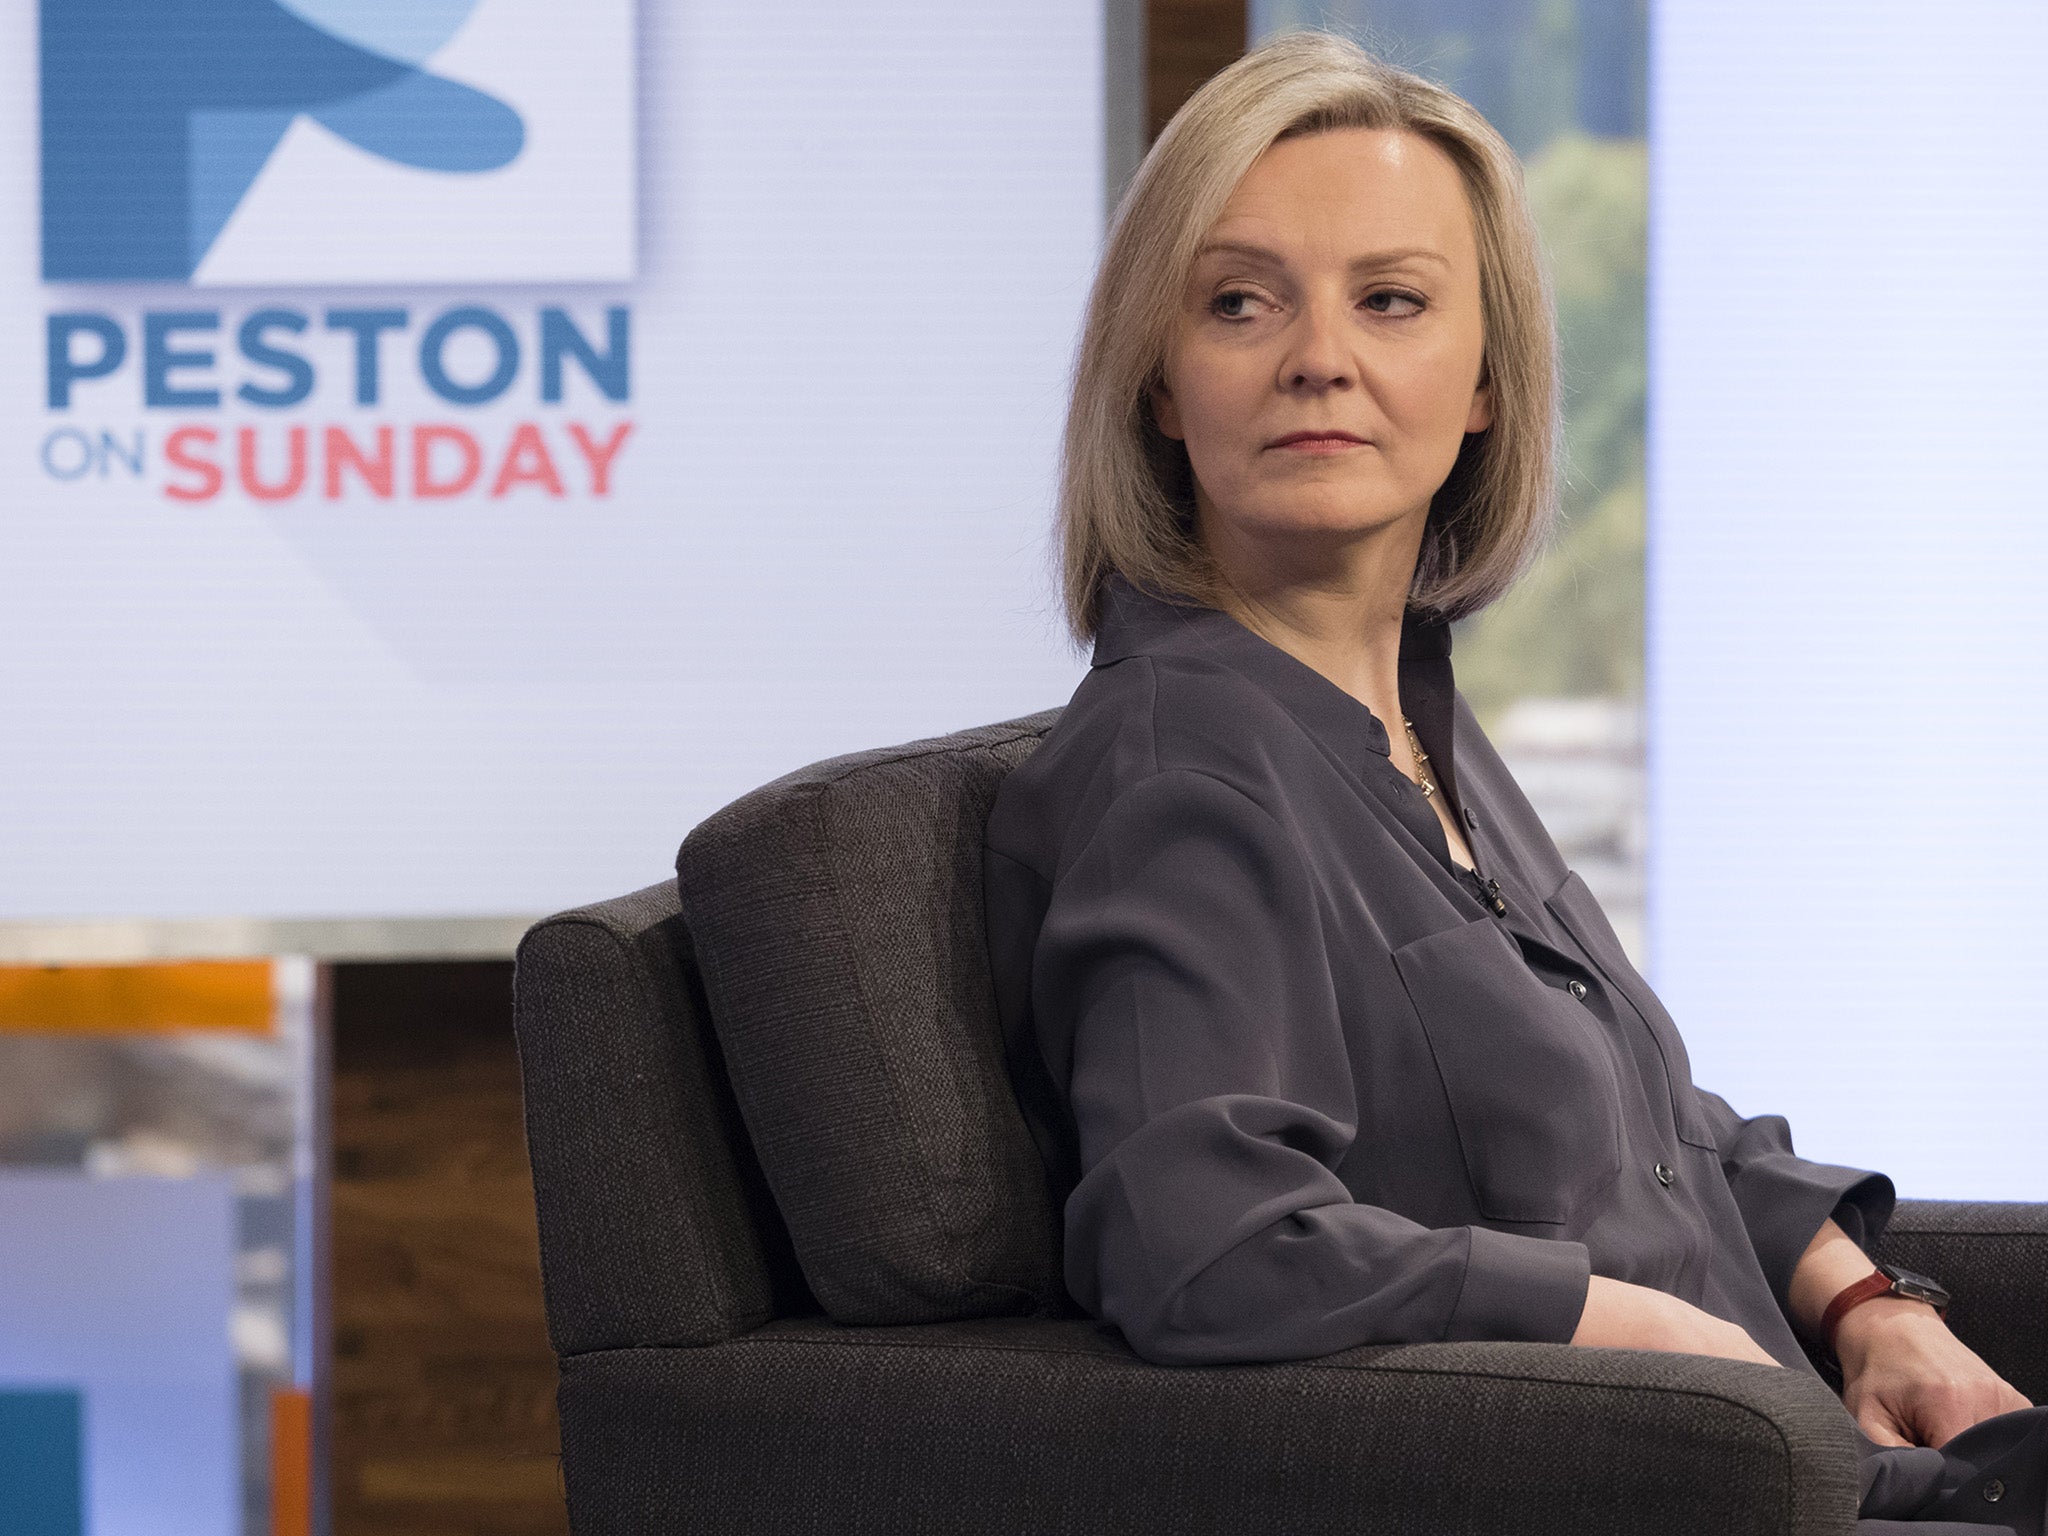 We left out the word 'not' in a story referring to Liz Truss